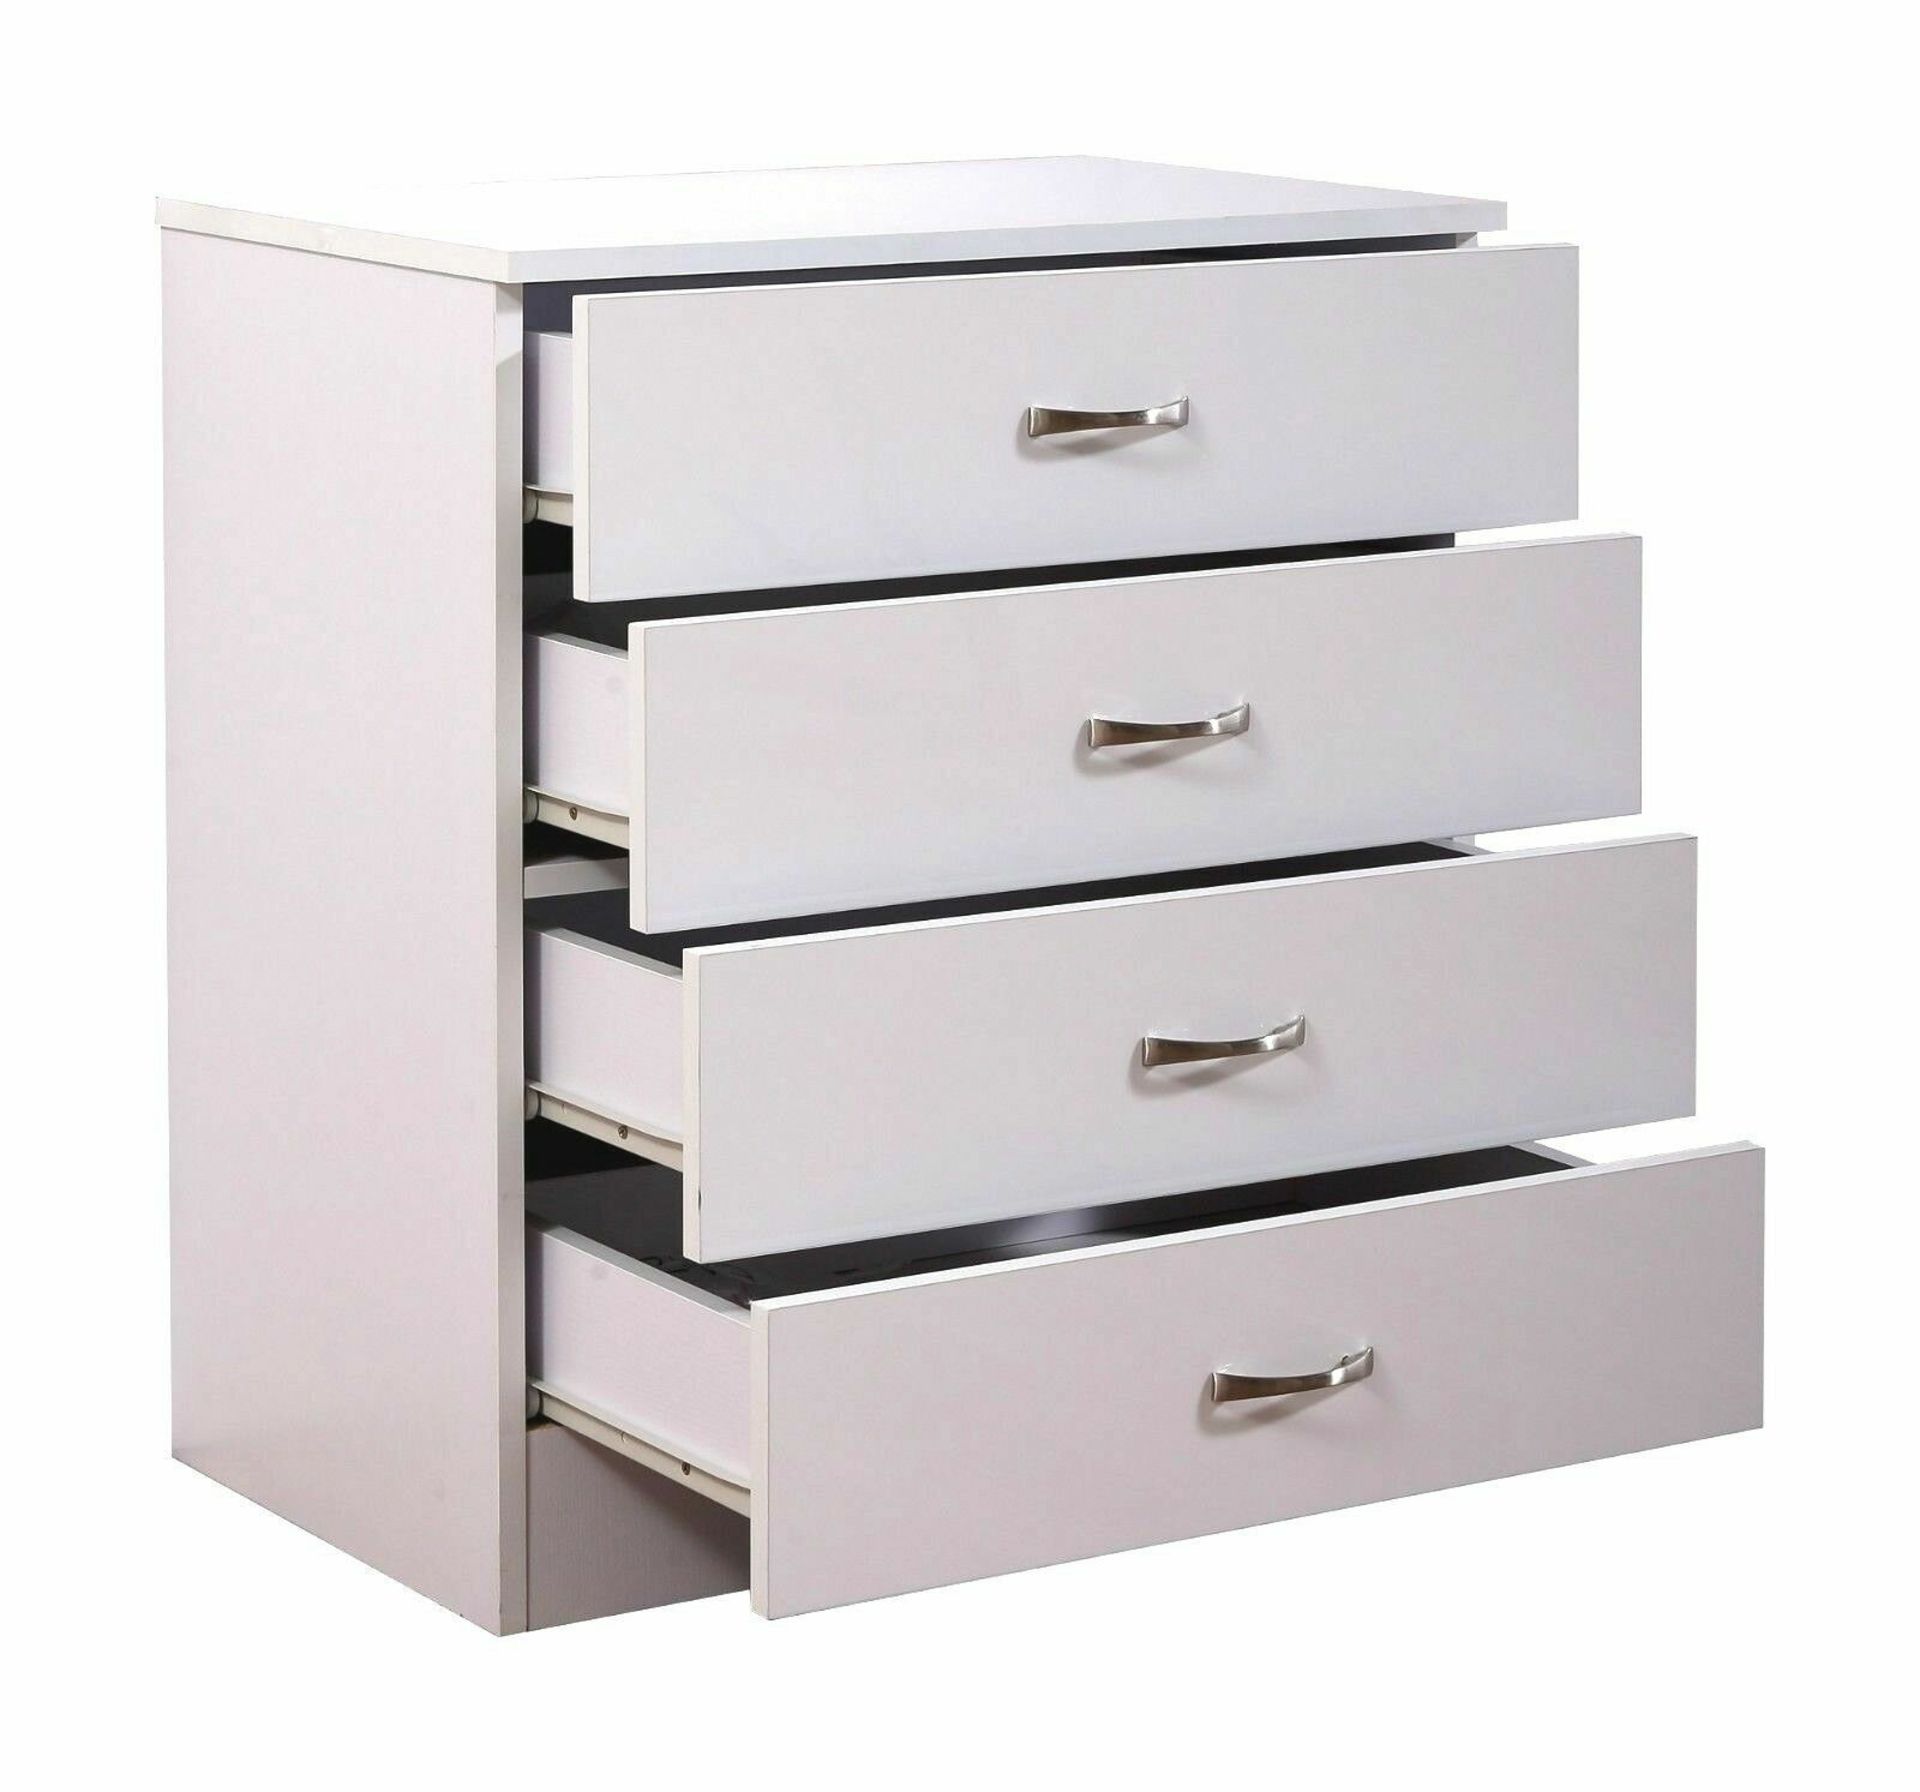 WHITE 4 DRAWER CHEST WITH HIGH GLOSS FRONTS - Image 2 of 4